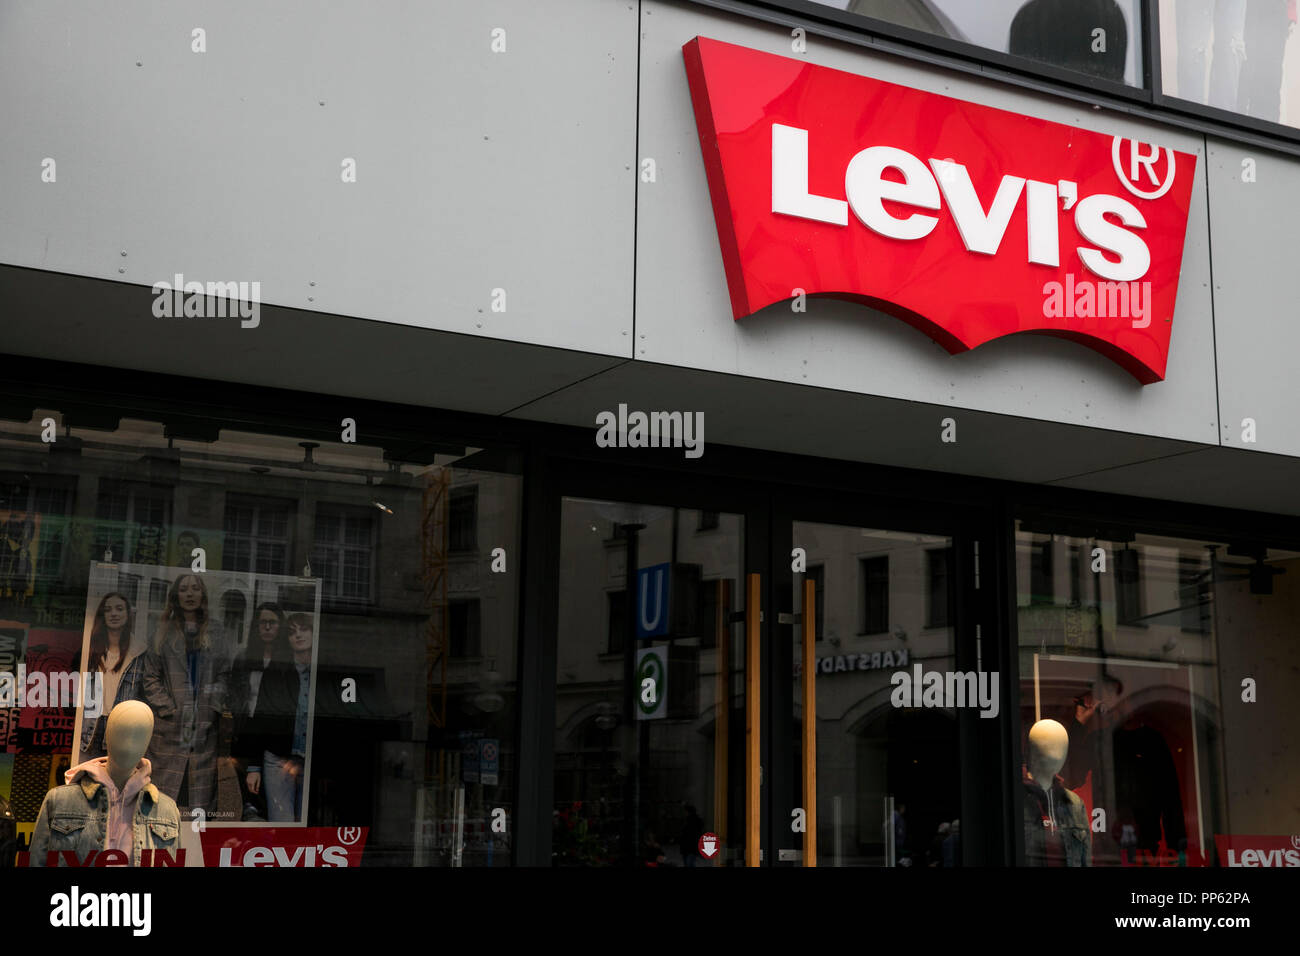 A logo sign outside of a Levi Strauss & Co. (Levi's) retail store in Munich, Germany, on September 2, 2018. Stock Photo